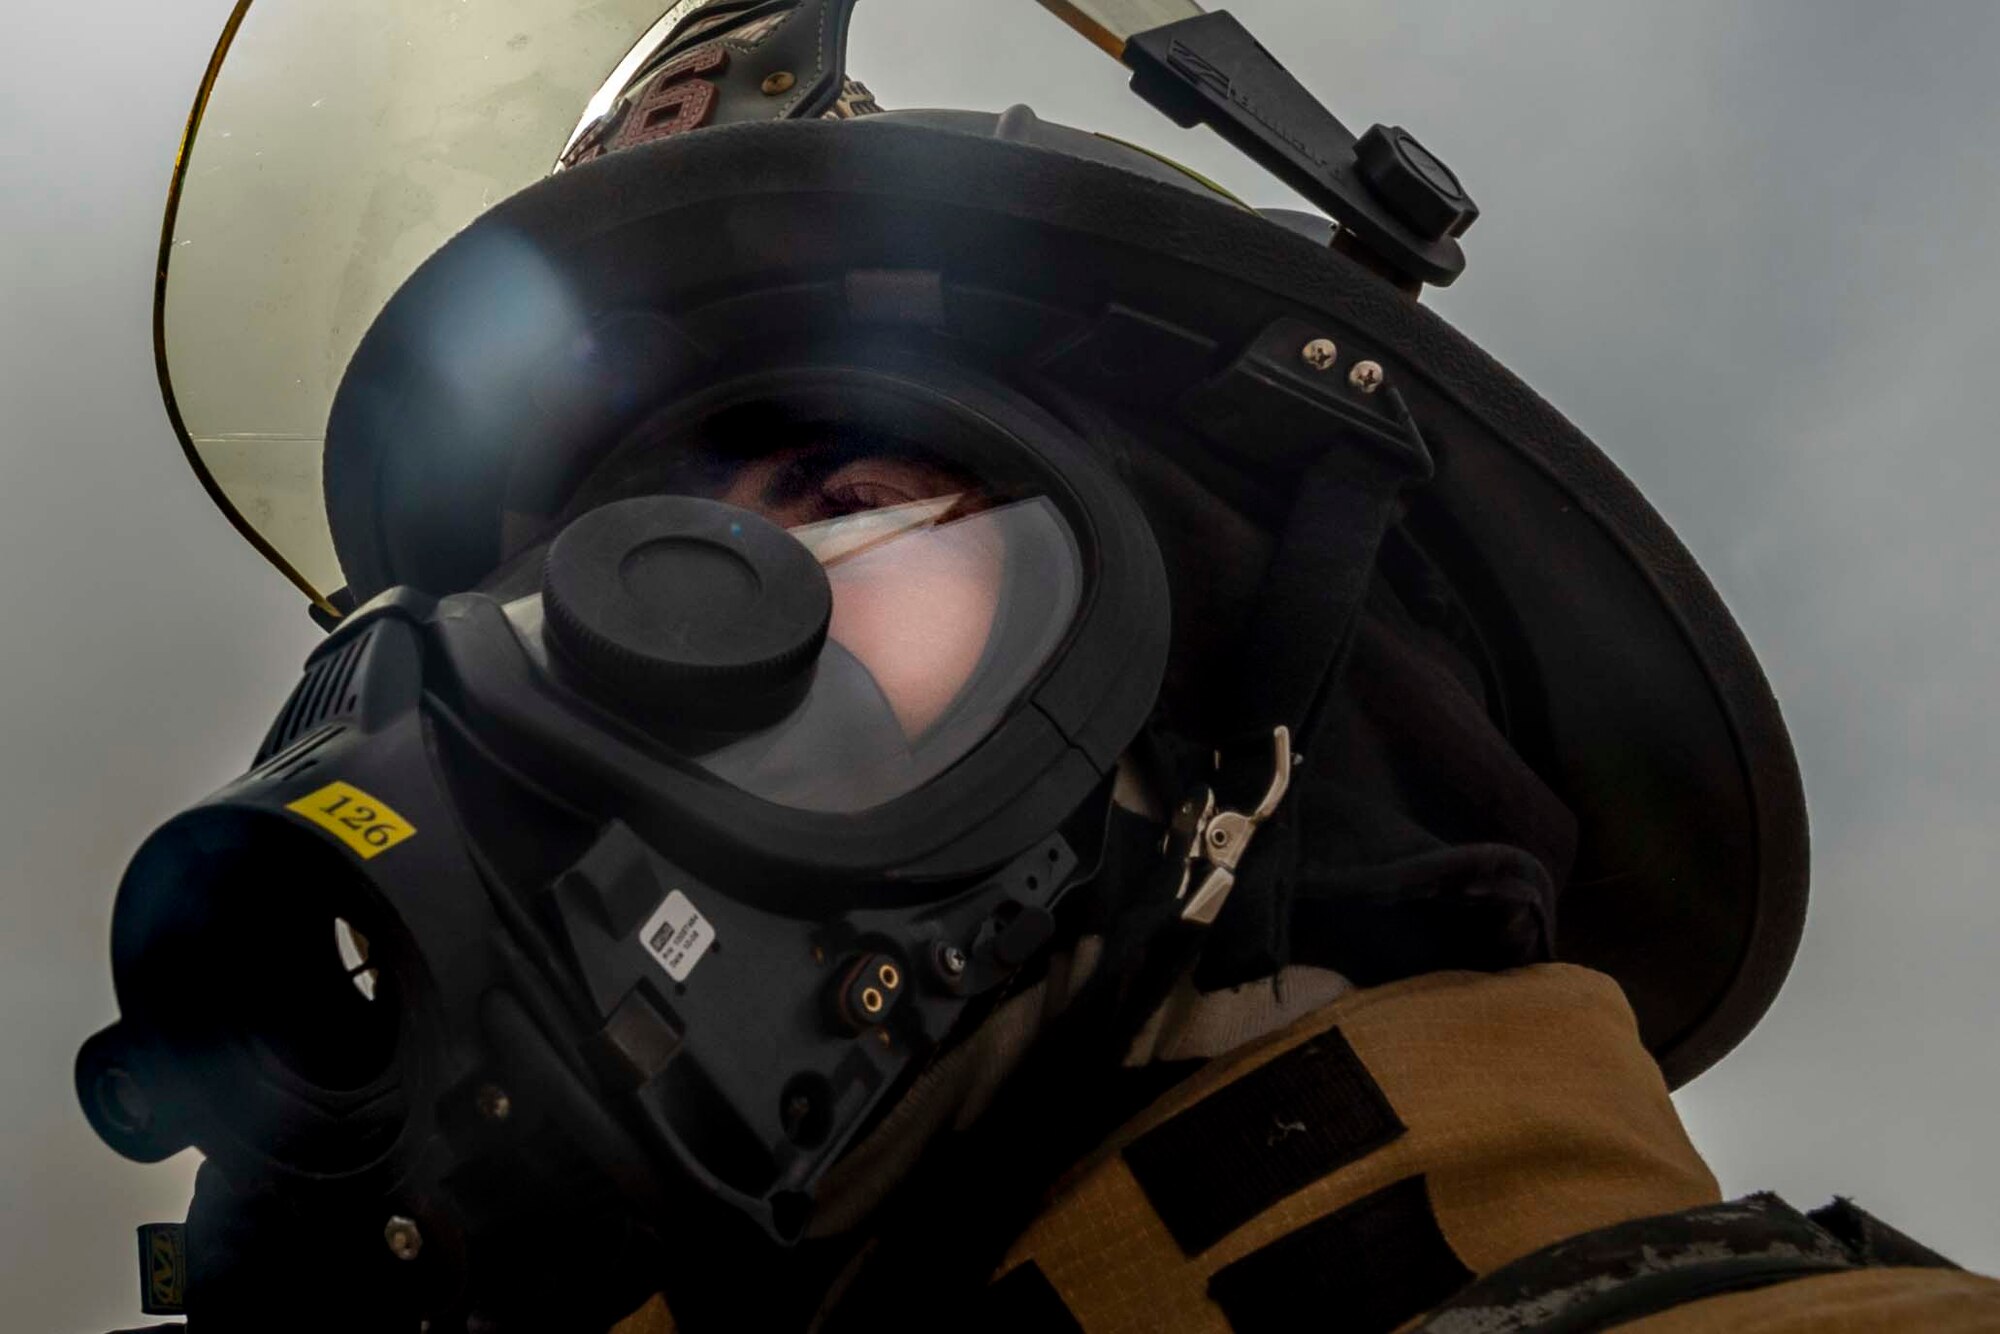 Senior Airman Michael Tuck, 386th Expeditionary Civil Engineer Squadron firefighter, looks up to adjust his mask during an all-hazard training exercise at Ali Al Salem Air Base, Kuwait, May 5, 2020. The exercise was designed to enhance interoperability between multiple firstresponder teams with the goal of responding, identifying and controlling potential real-world scenarios. (U.S. Air Force photo by Senior Airman JaNae Capuno)